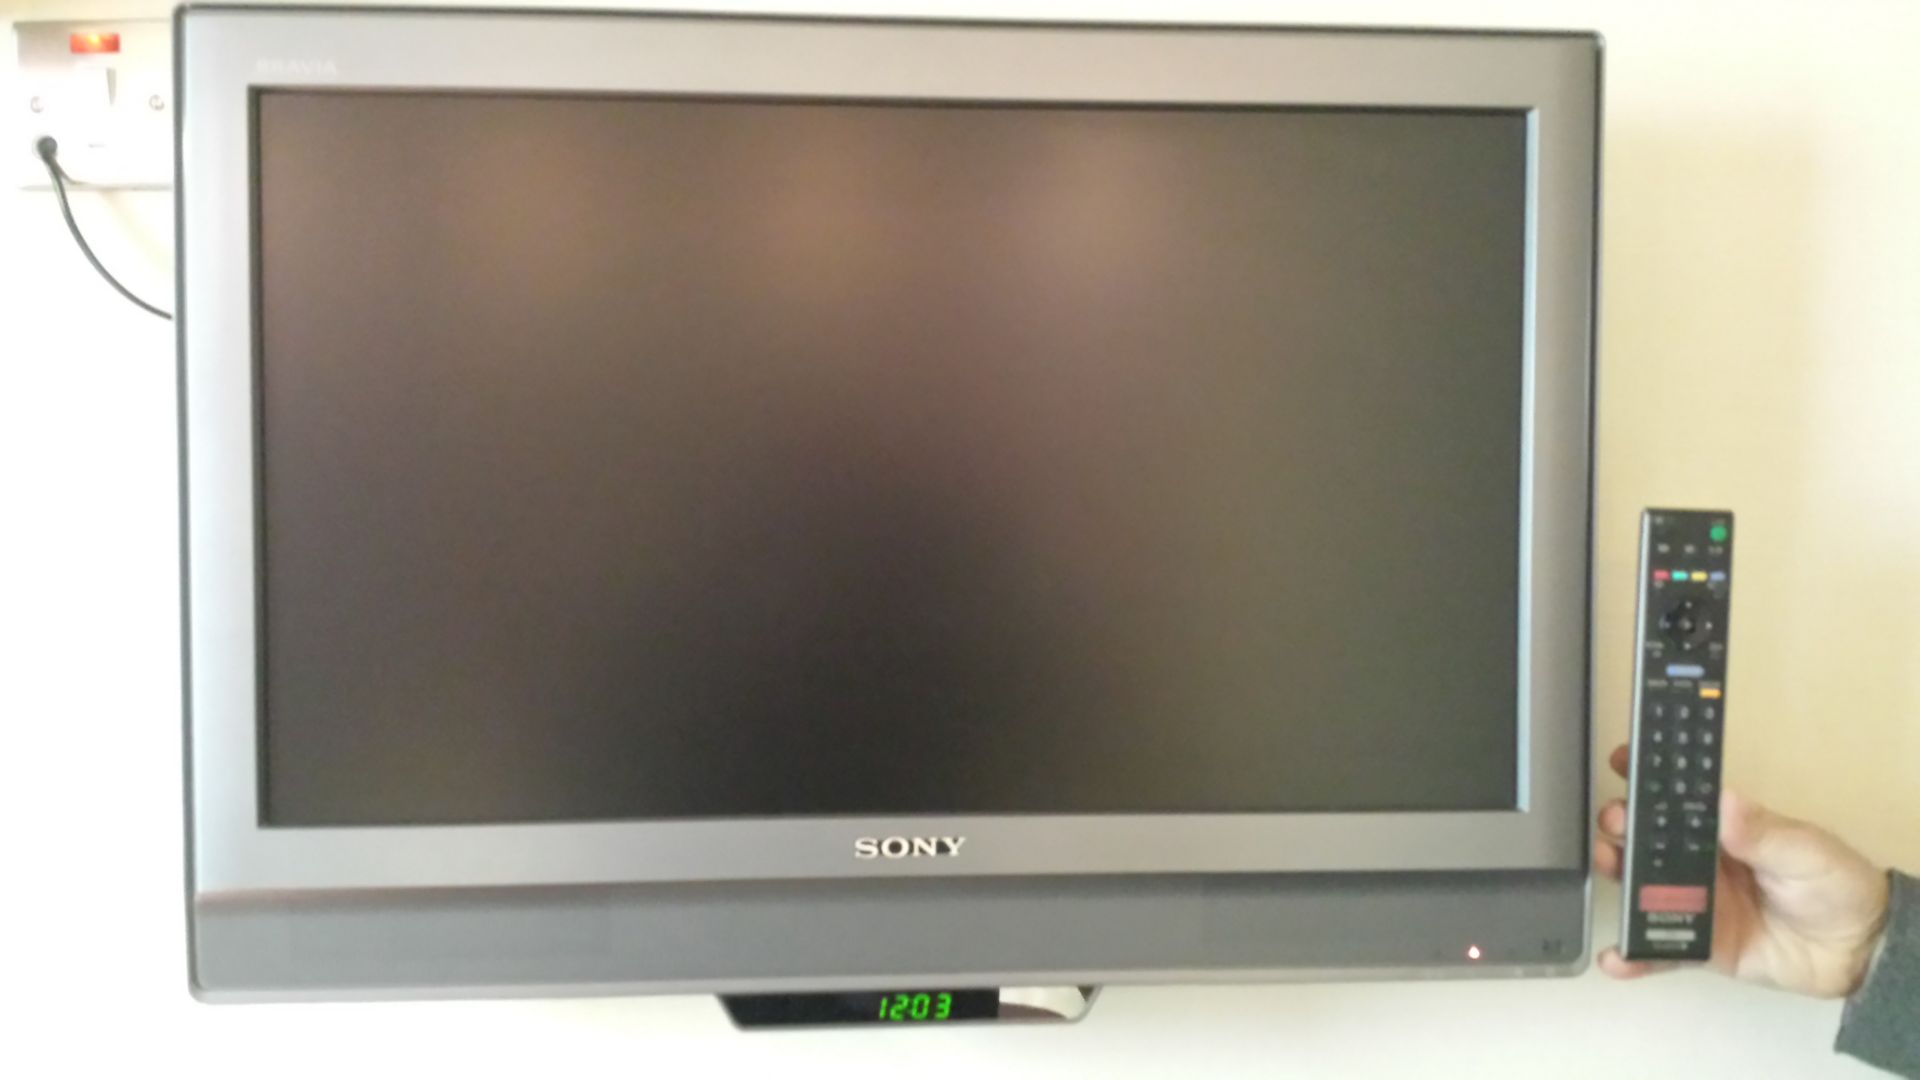 Sony Flat Screen TV with remote control